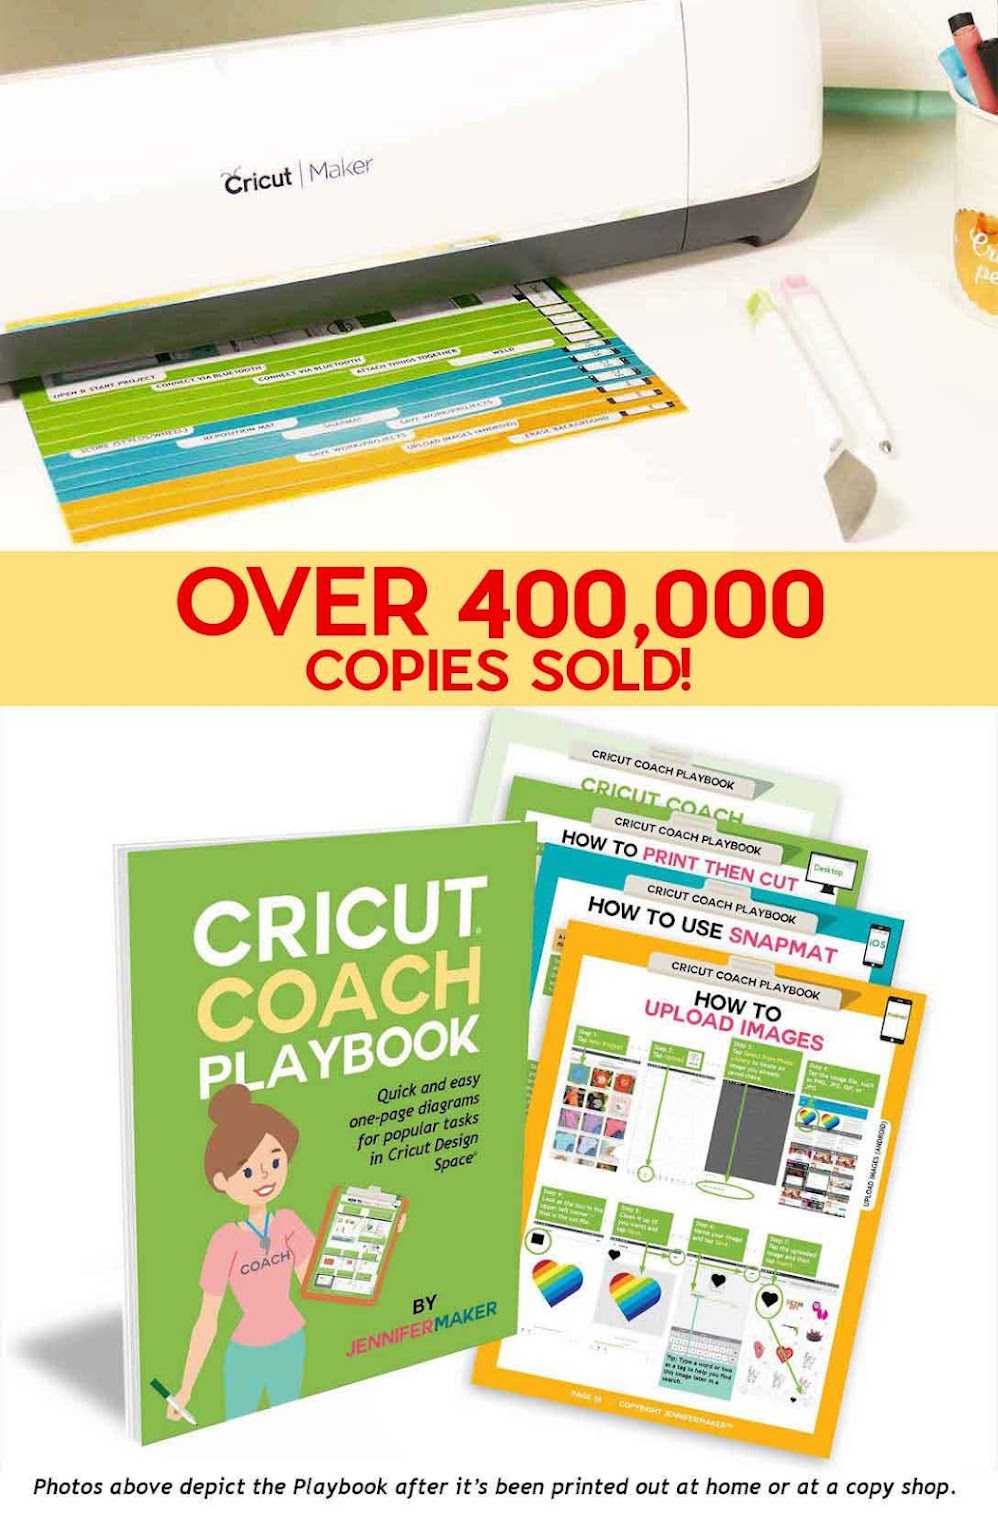 Cricut Coach Playbook: Quick and Easy One-Page Diagrams for Popular Tasks  in Cricut Design Space: Maker, Jennifer: 9781647370053: : Books